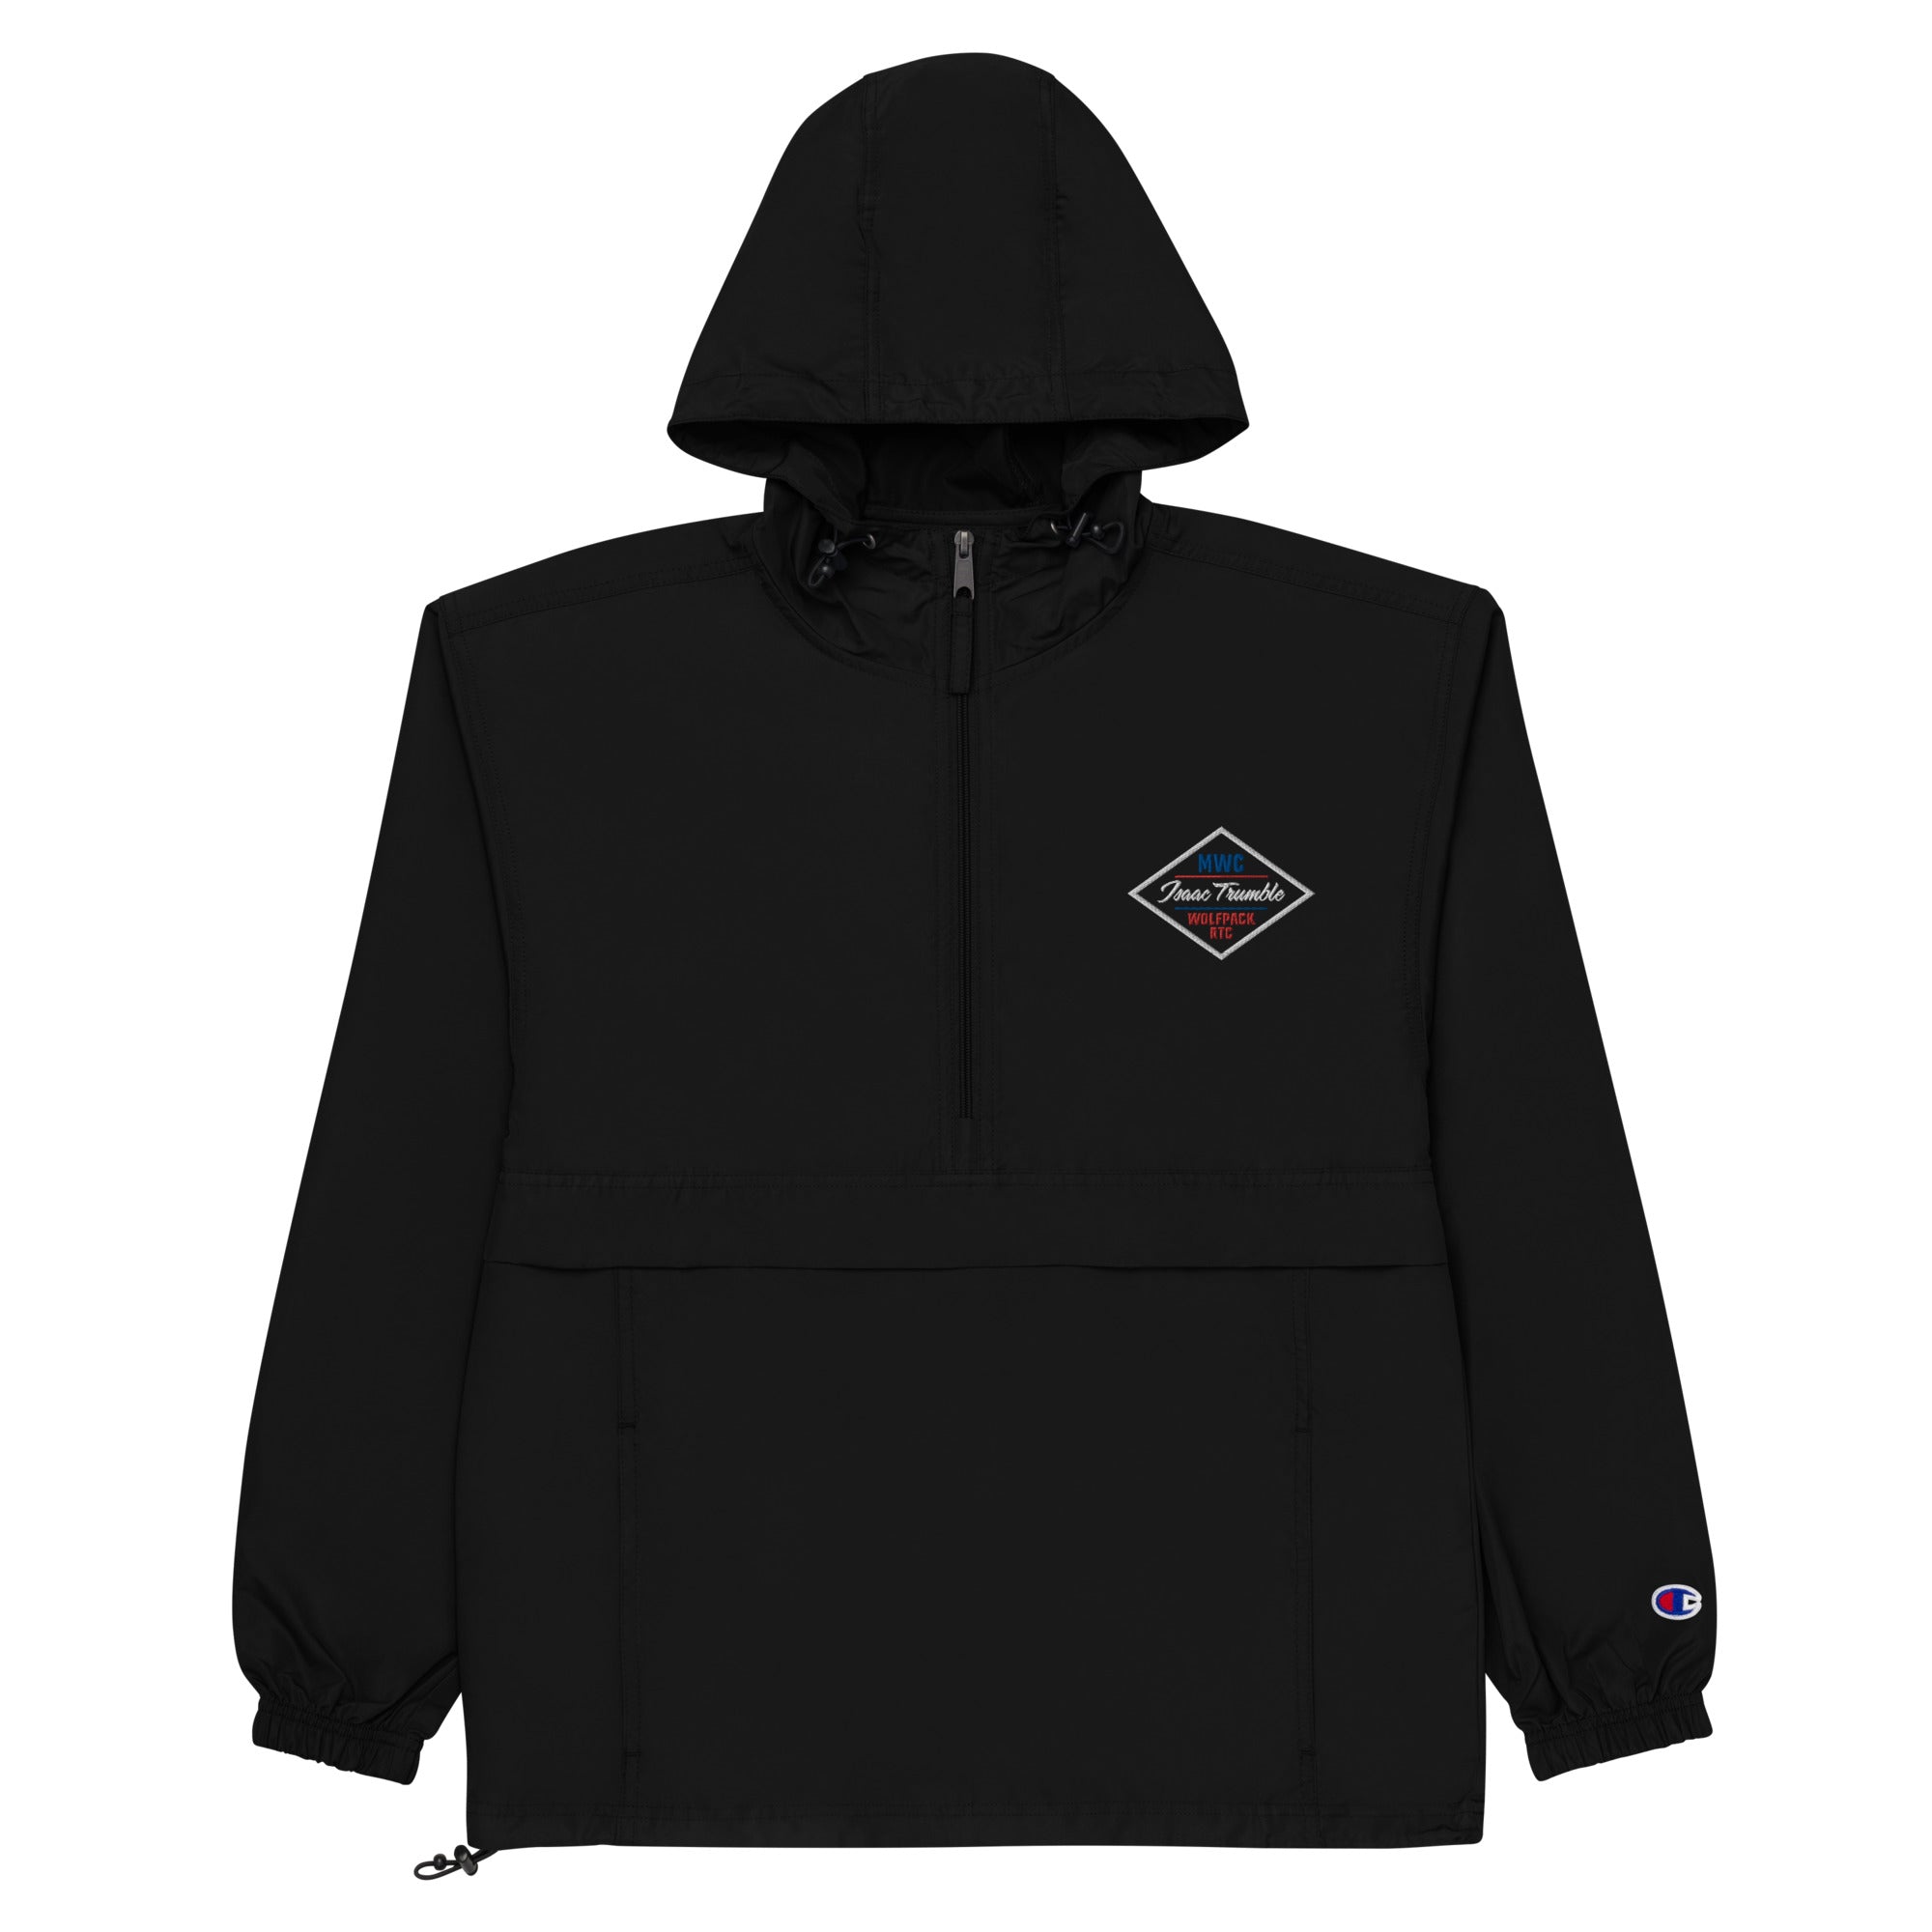 Trumble - MWC Embroidered Champion Packable Jacket